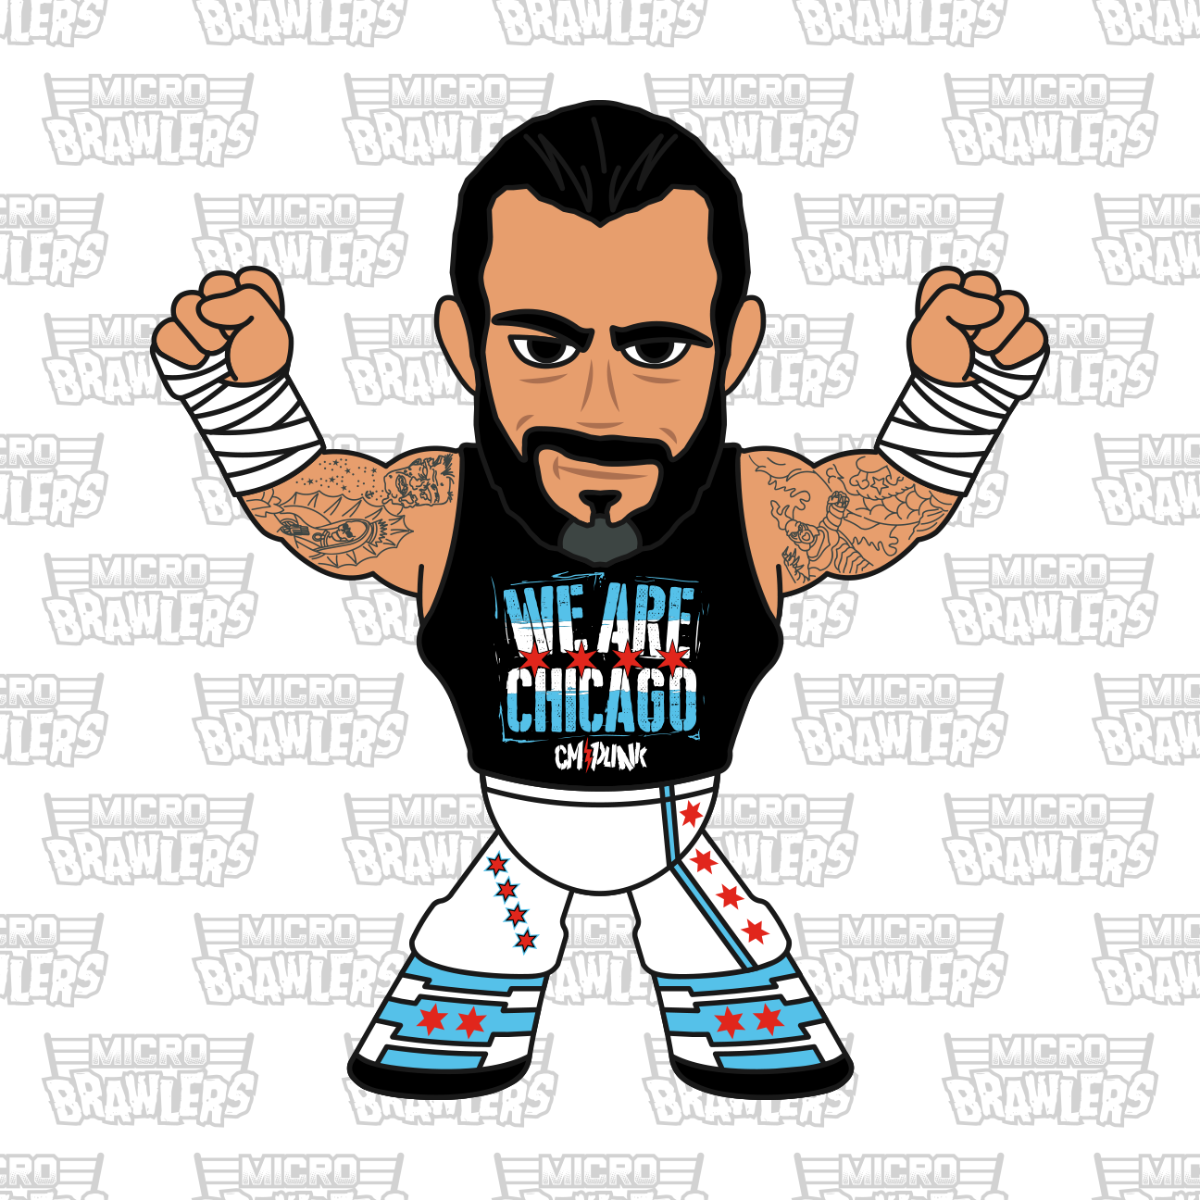 CM Punk (Retro) Micro Brawler is available now for pre-order! But